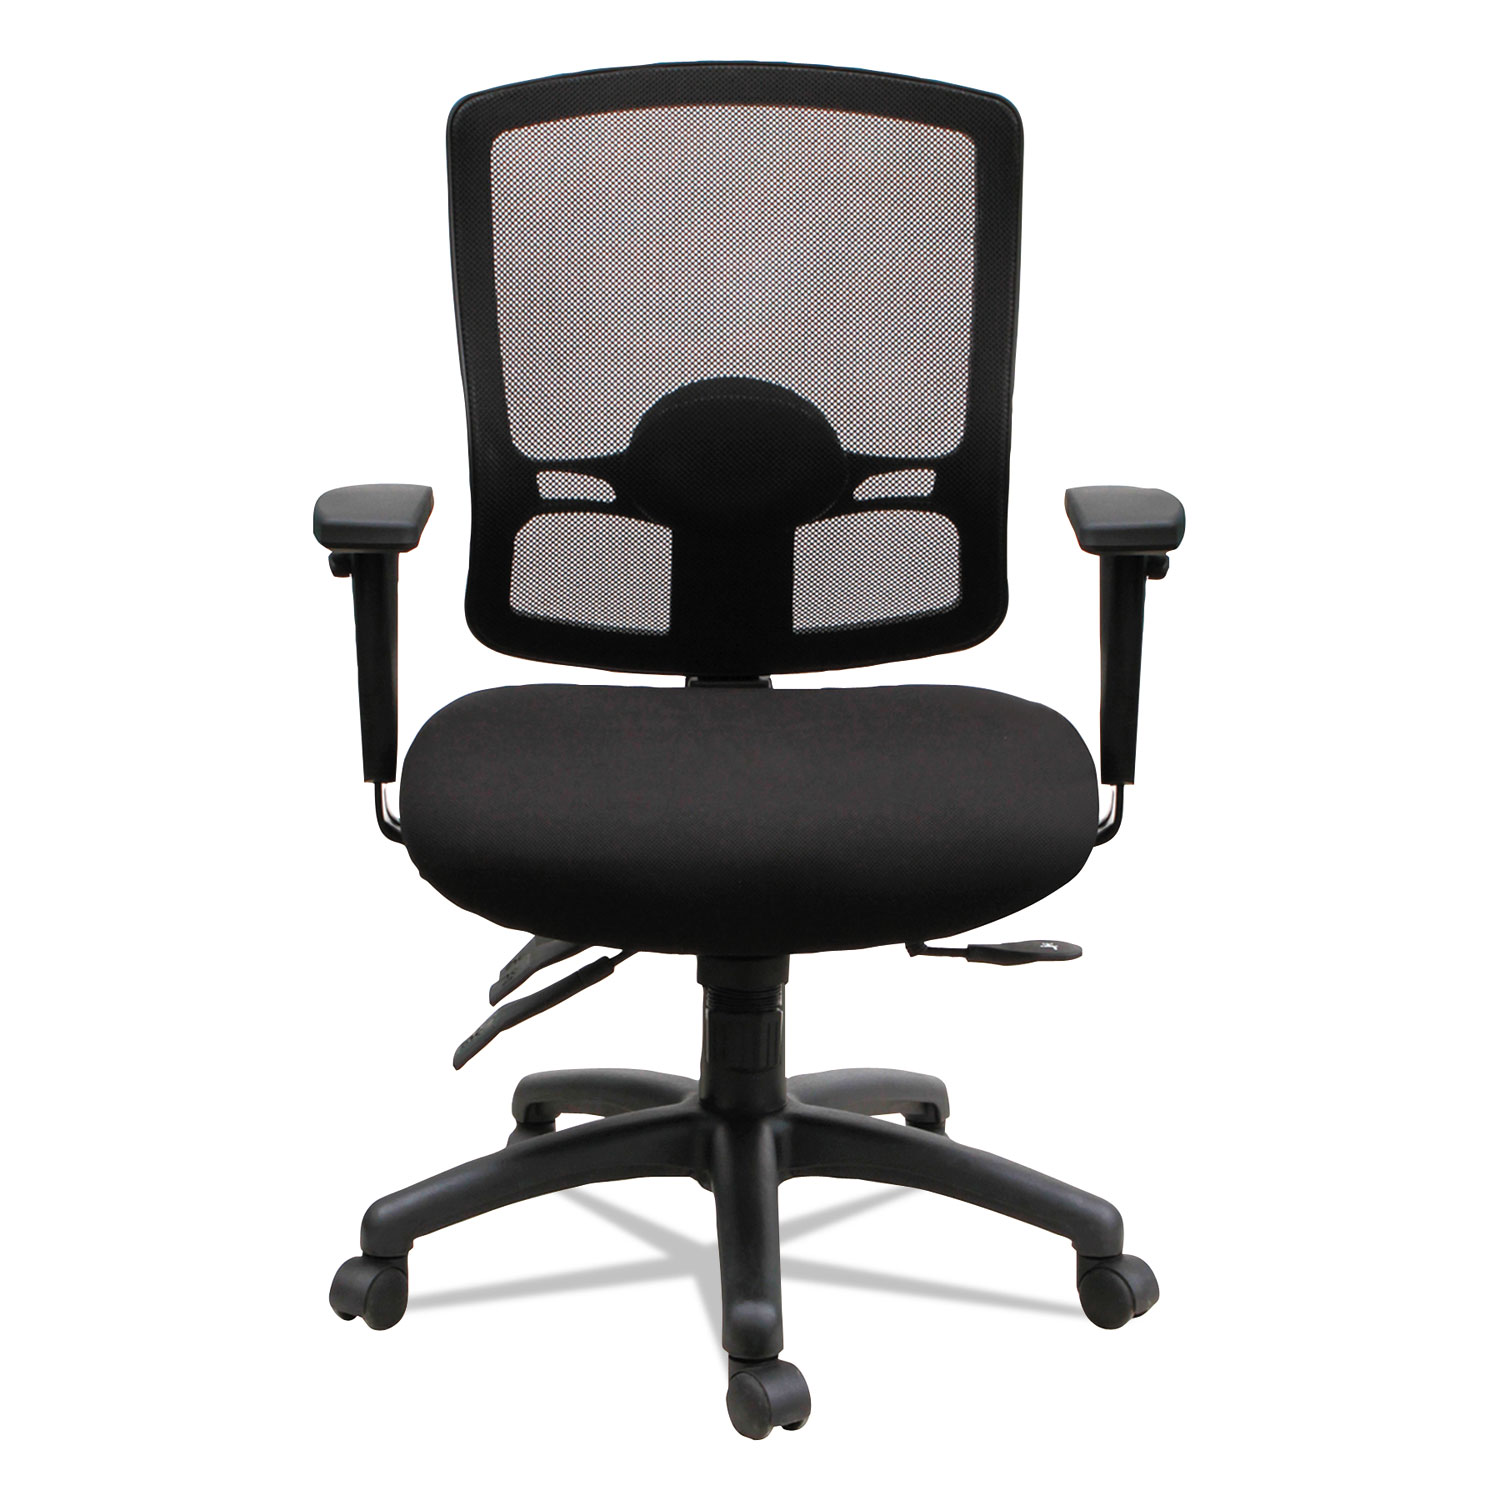 Etros Series Mid-Back Multifunction with Seat Slide Chair, Black